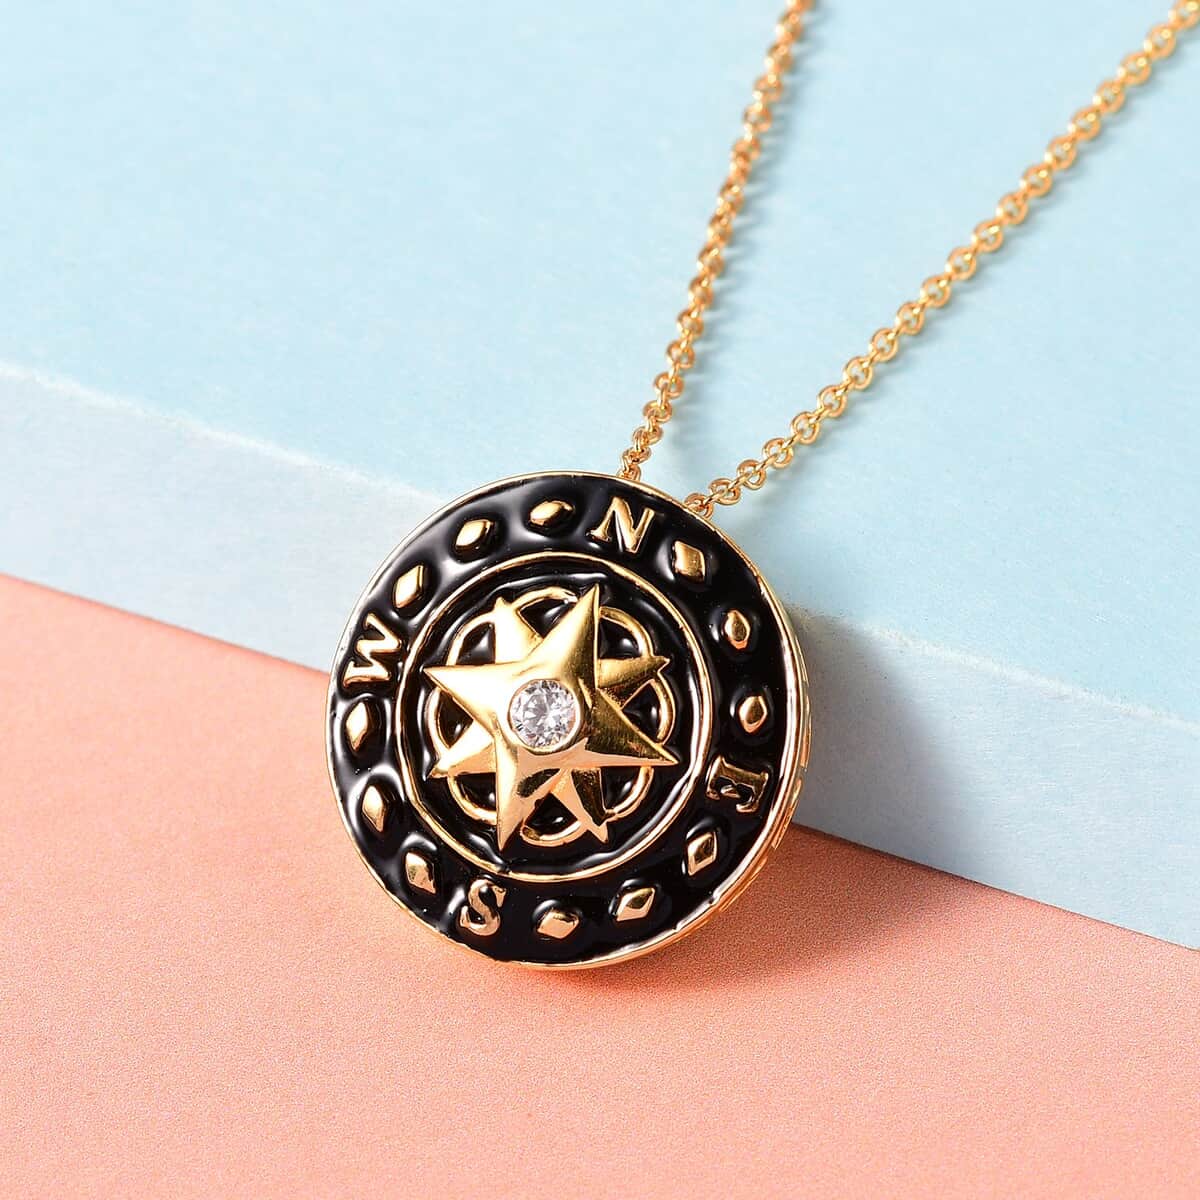 Karis White Zircon, Enameled Compass Style Pendant Necklace (20 Inches) in 18K YG Plated and ION Plated YG Stainless Steel 0.25 ctw , Tarnish-Free, Waterproof, Sweat Proof Jewelry image number 1